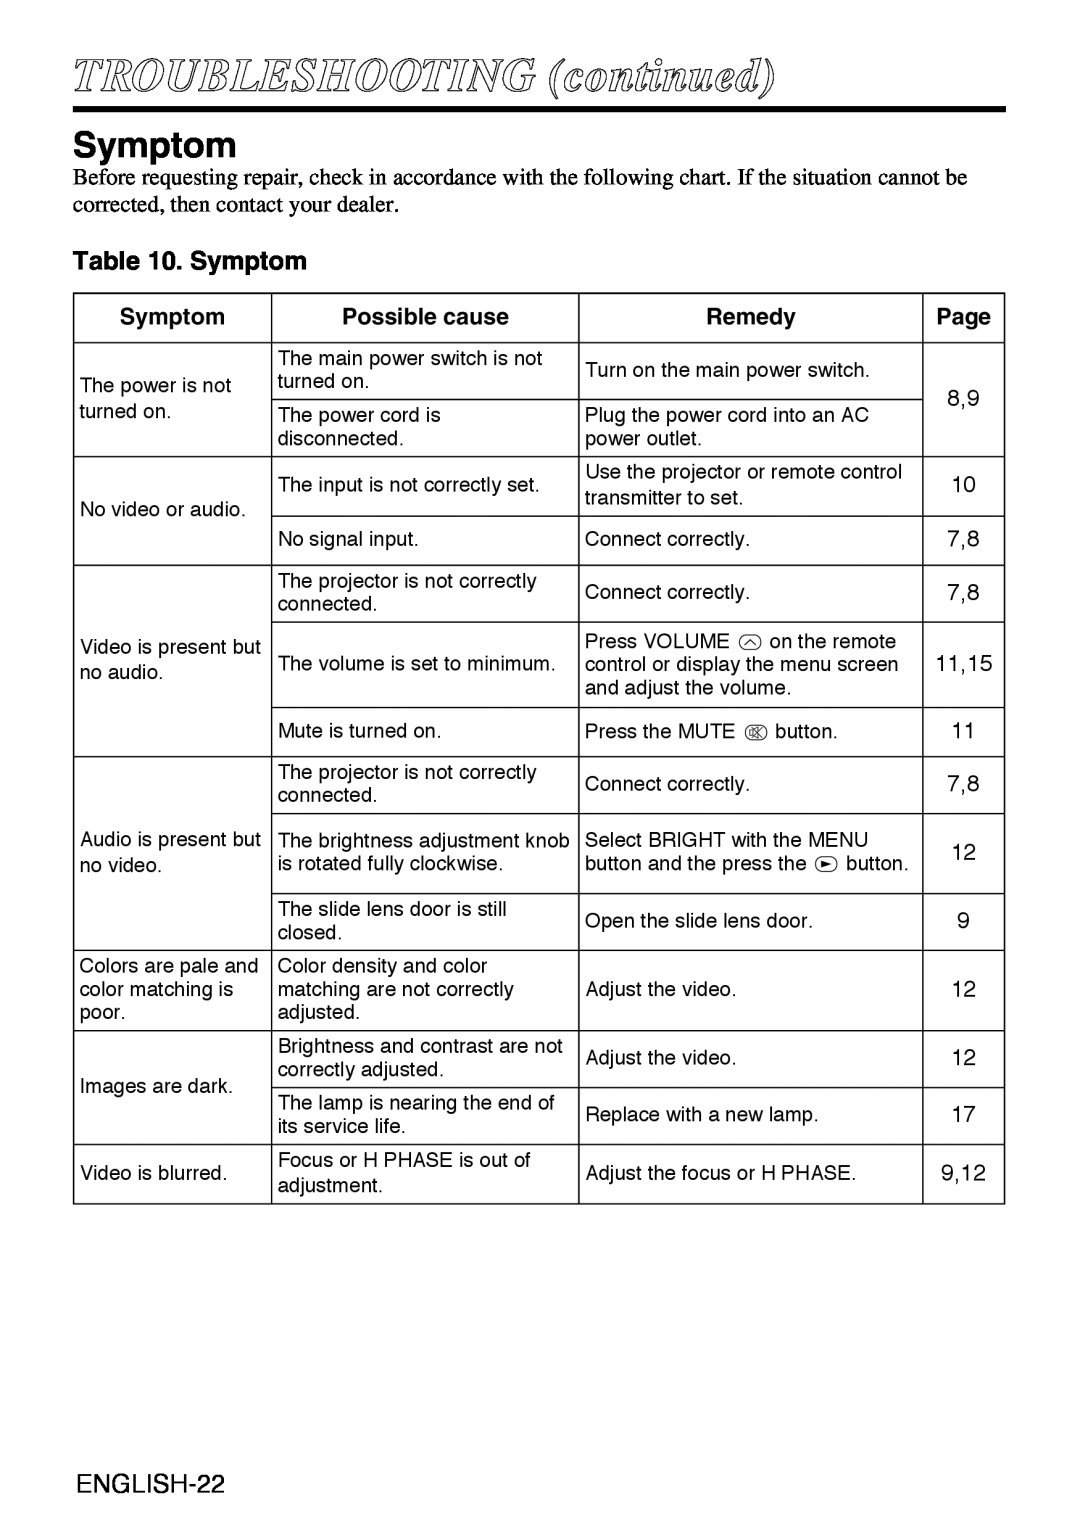 Liesegang dv335 user manual Symptom, ENGLISH-22, Possible cause, Remedy, Page, TROUBLESHOOTING continued 